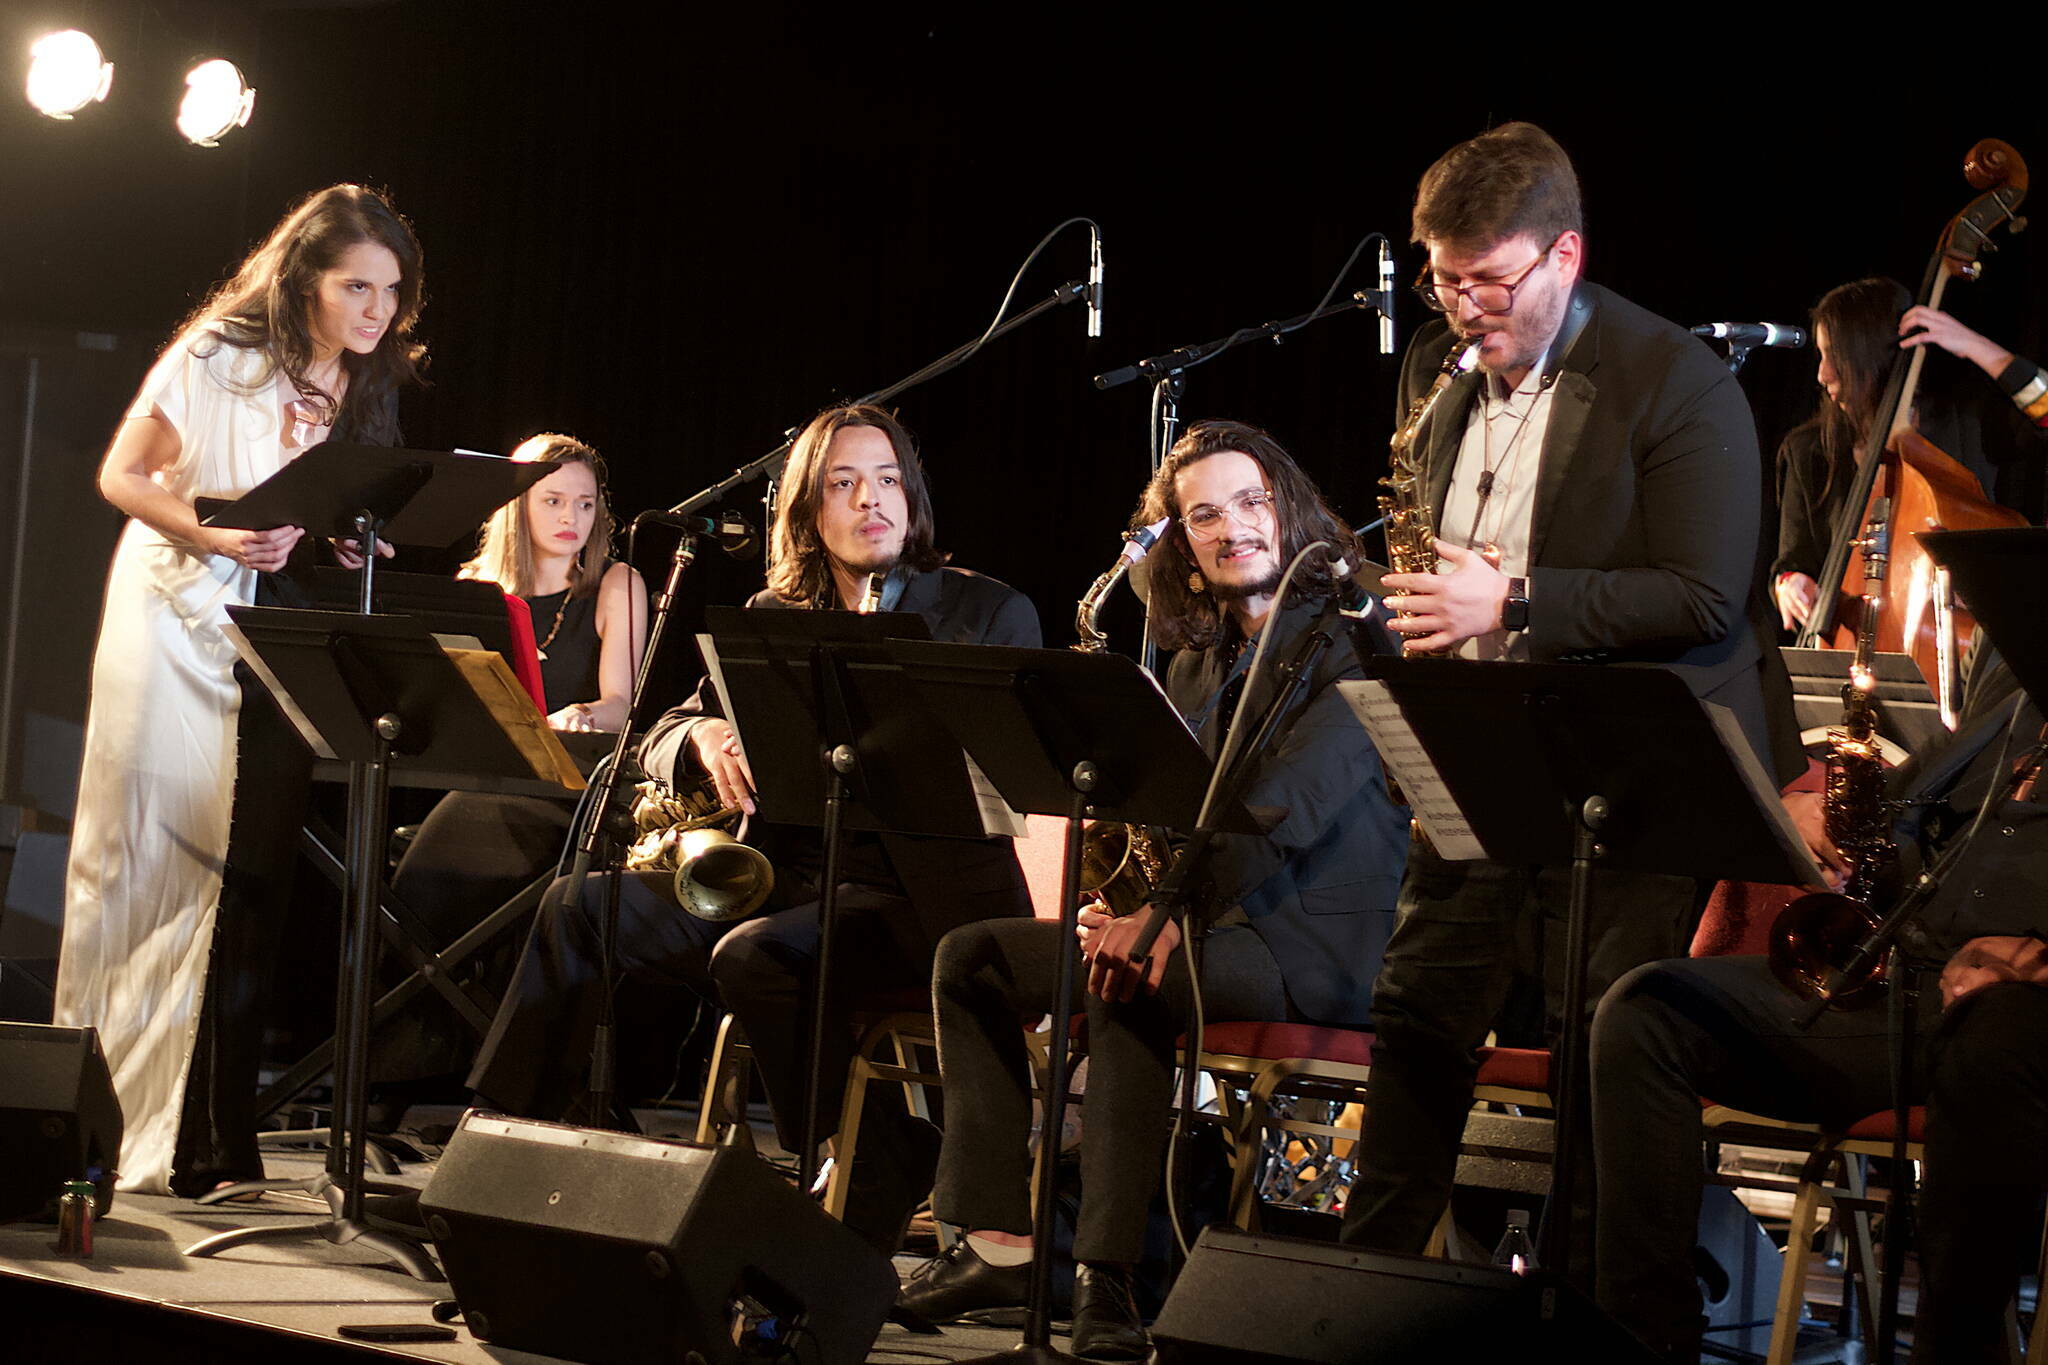 Julia Keefe, left, guides her Indigenous Big Band through a performance at Elizabeth Peratrovich Hall to open last spring’s Juneau Jazz & Classics festival on Friday, May 5, 2023. (Mark Sabbatini / Juneau Empire file photo)